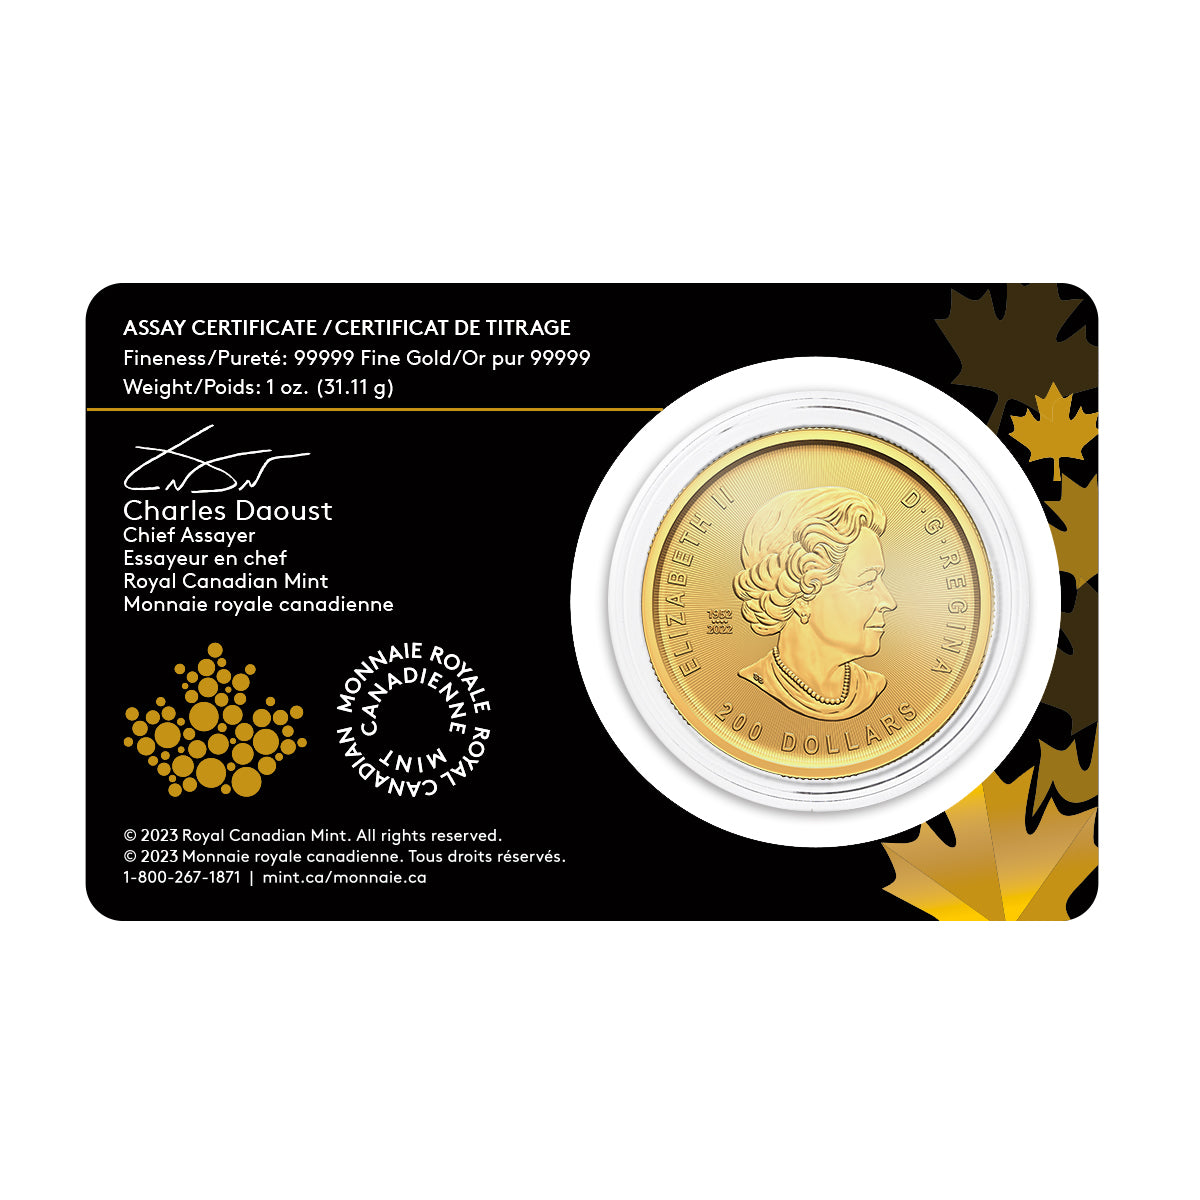 1 oz Gold Coin – 2023 Klondike Gold Rush: Passage for Gold - .99999 Au - Royal Canadian Mint